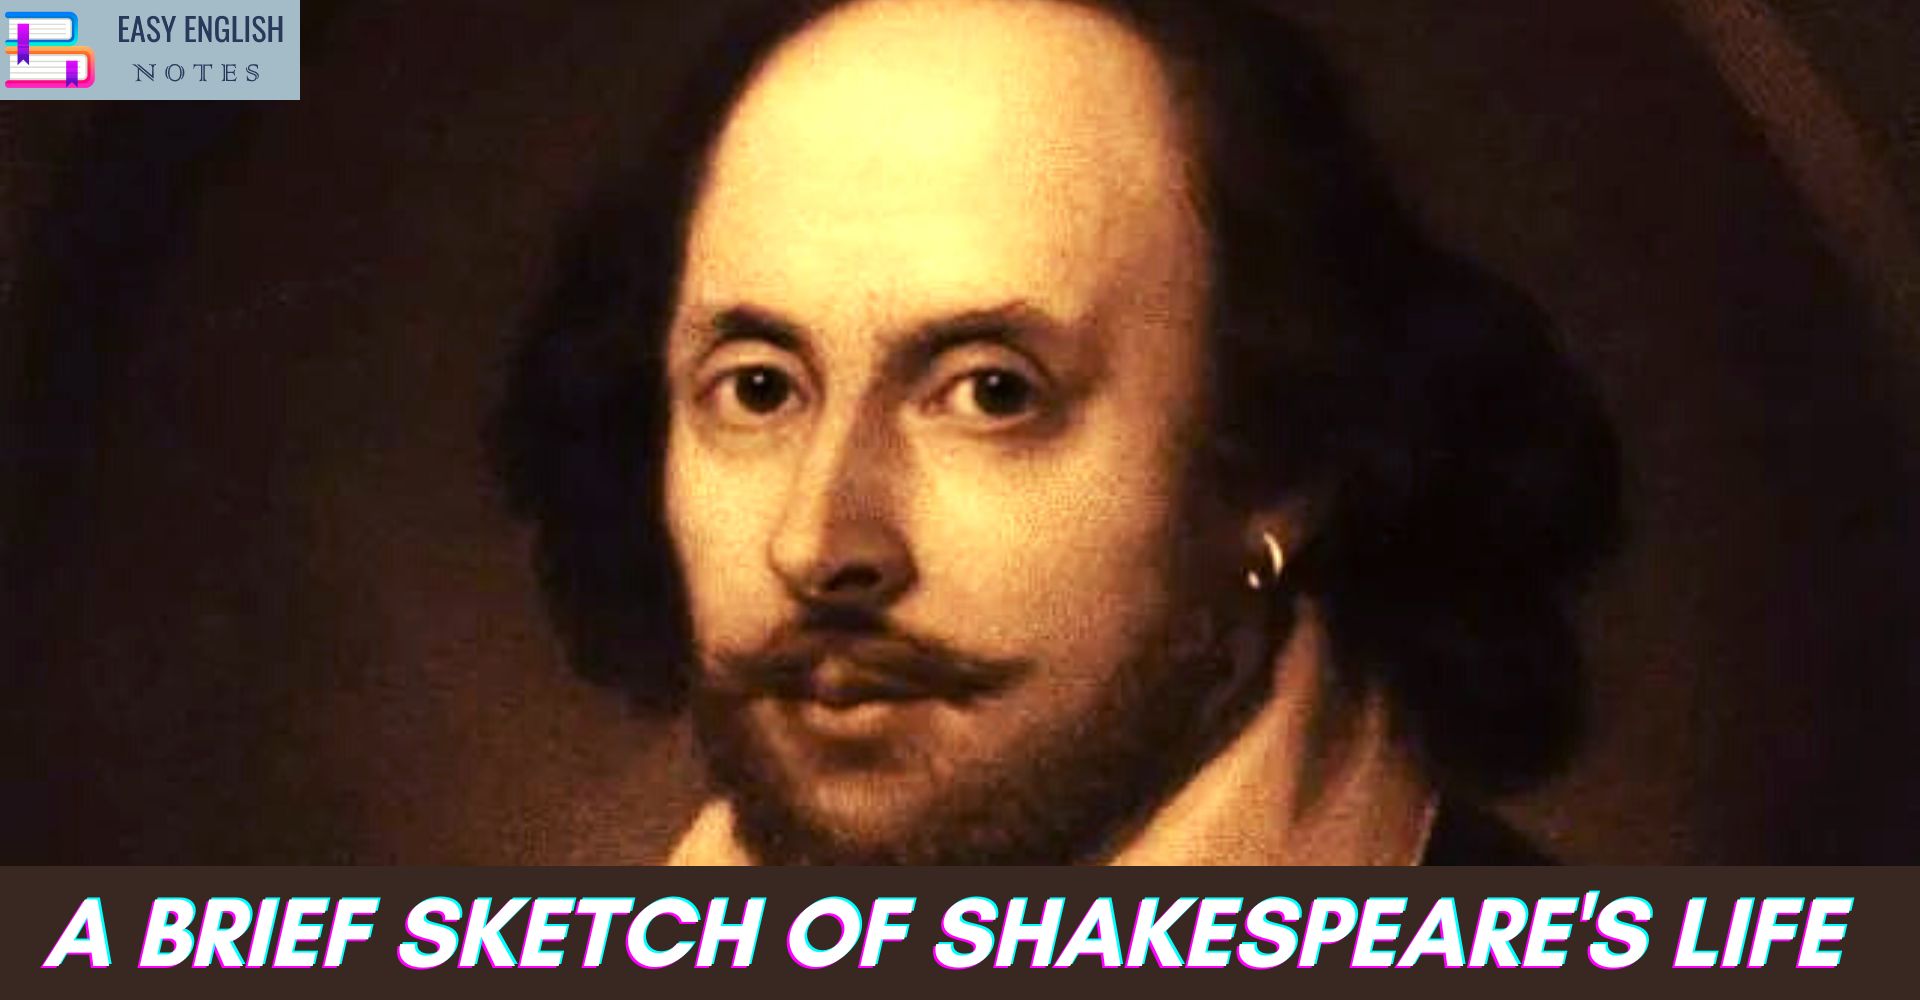 A brief sketch of Shakespeare's life